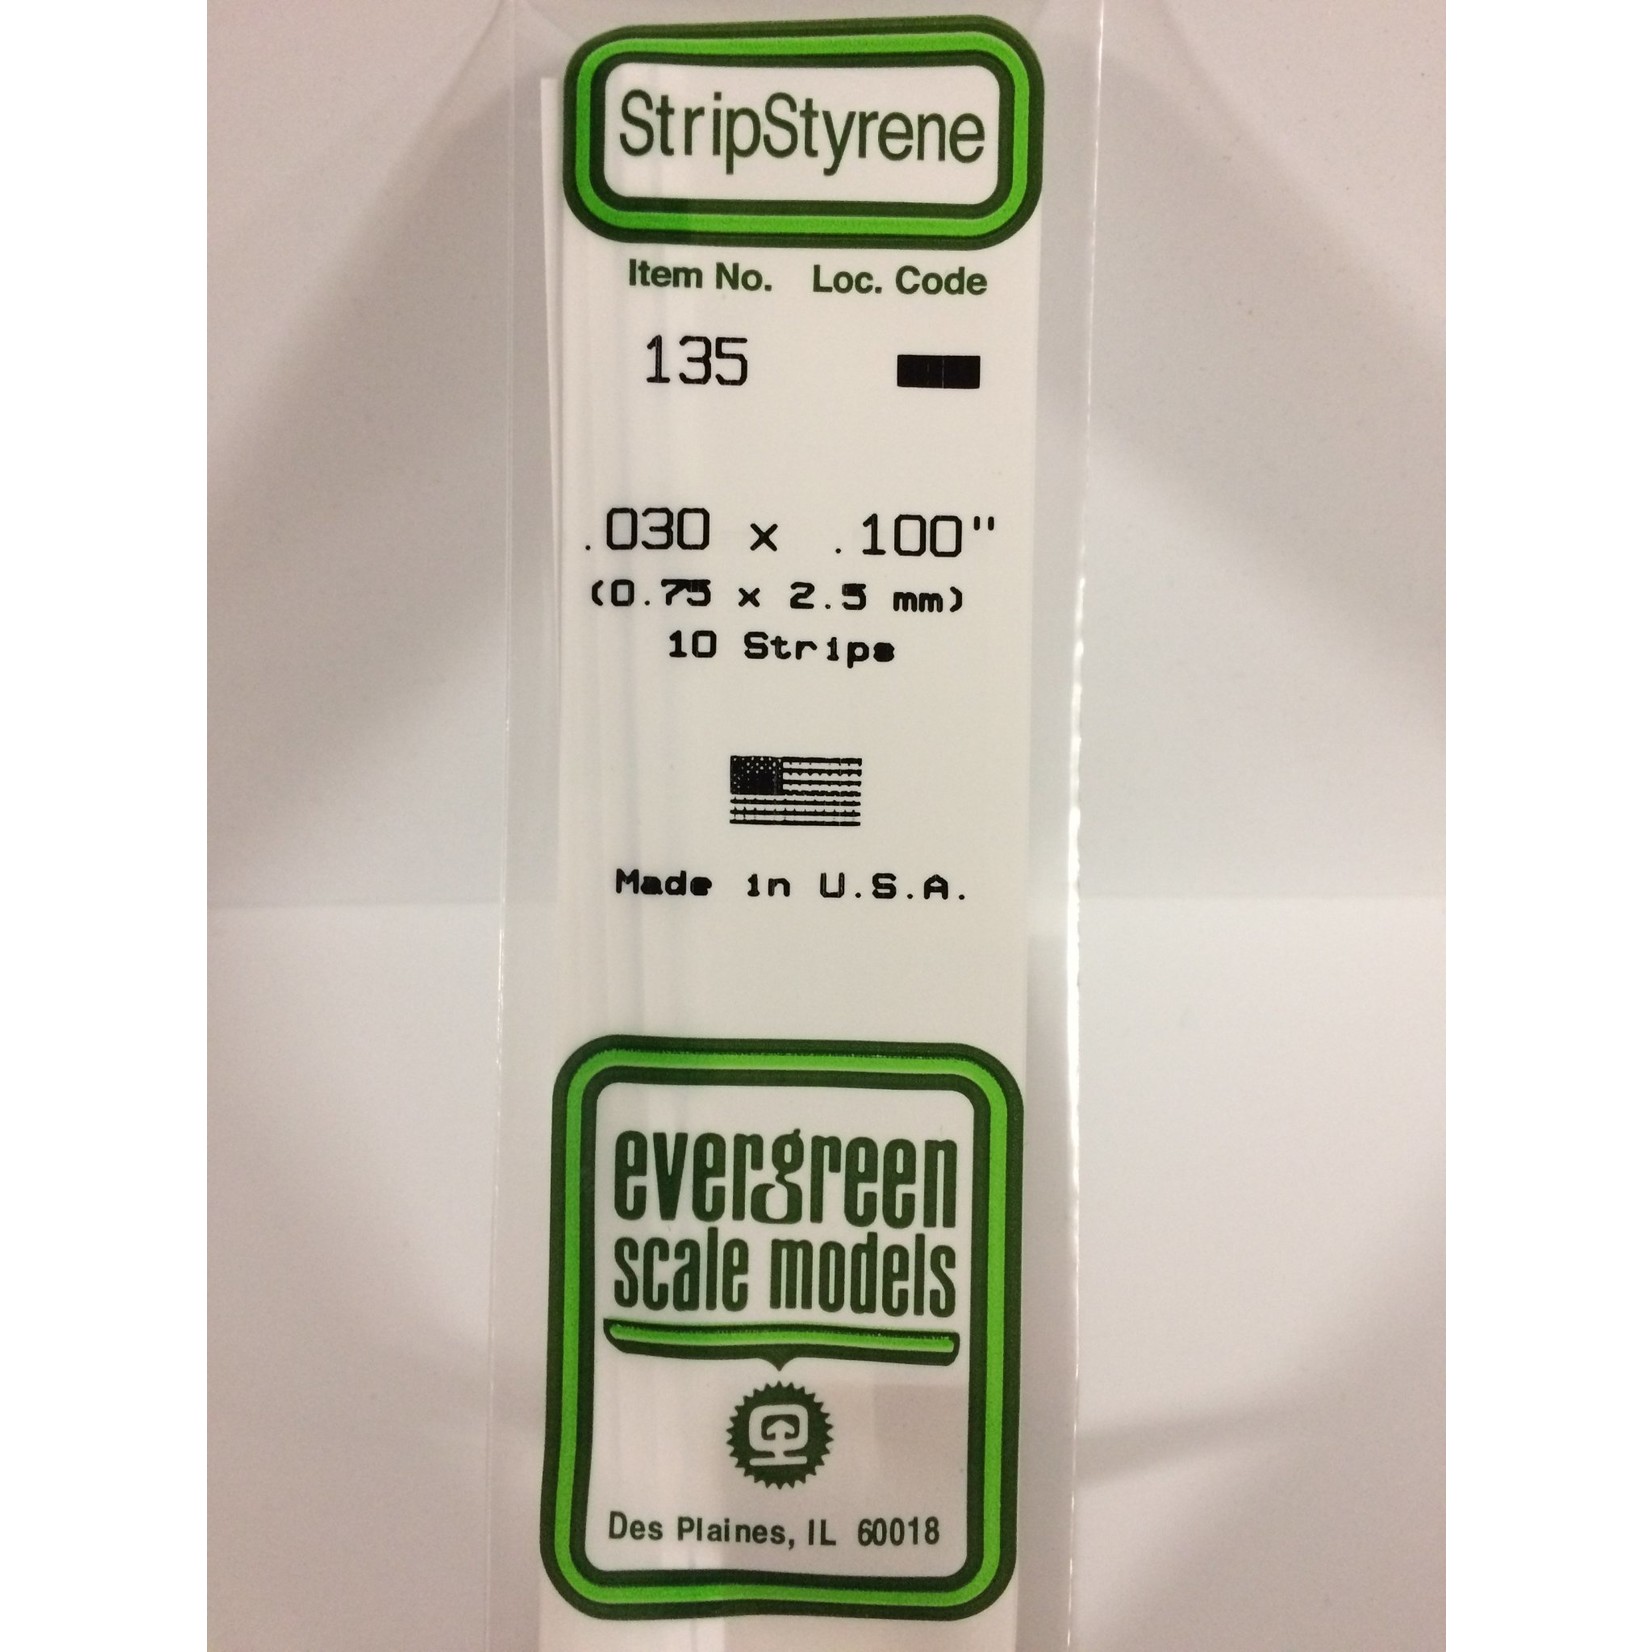 Evergreen Scale Models Evergreen 135 - .030" X .100" OPAQUE WHITE POLYSTYRENE STRIP